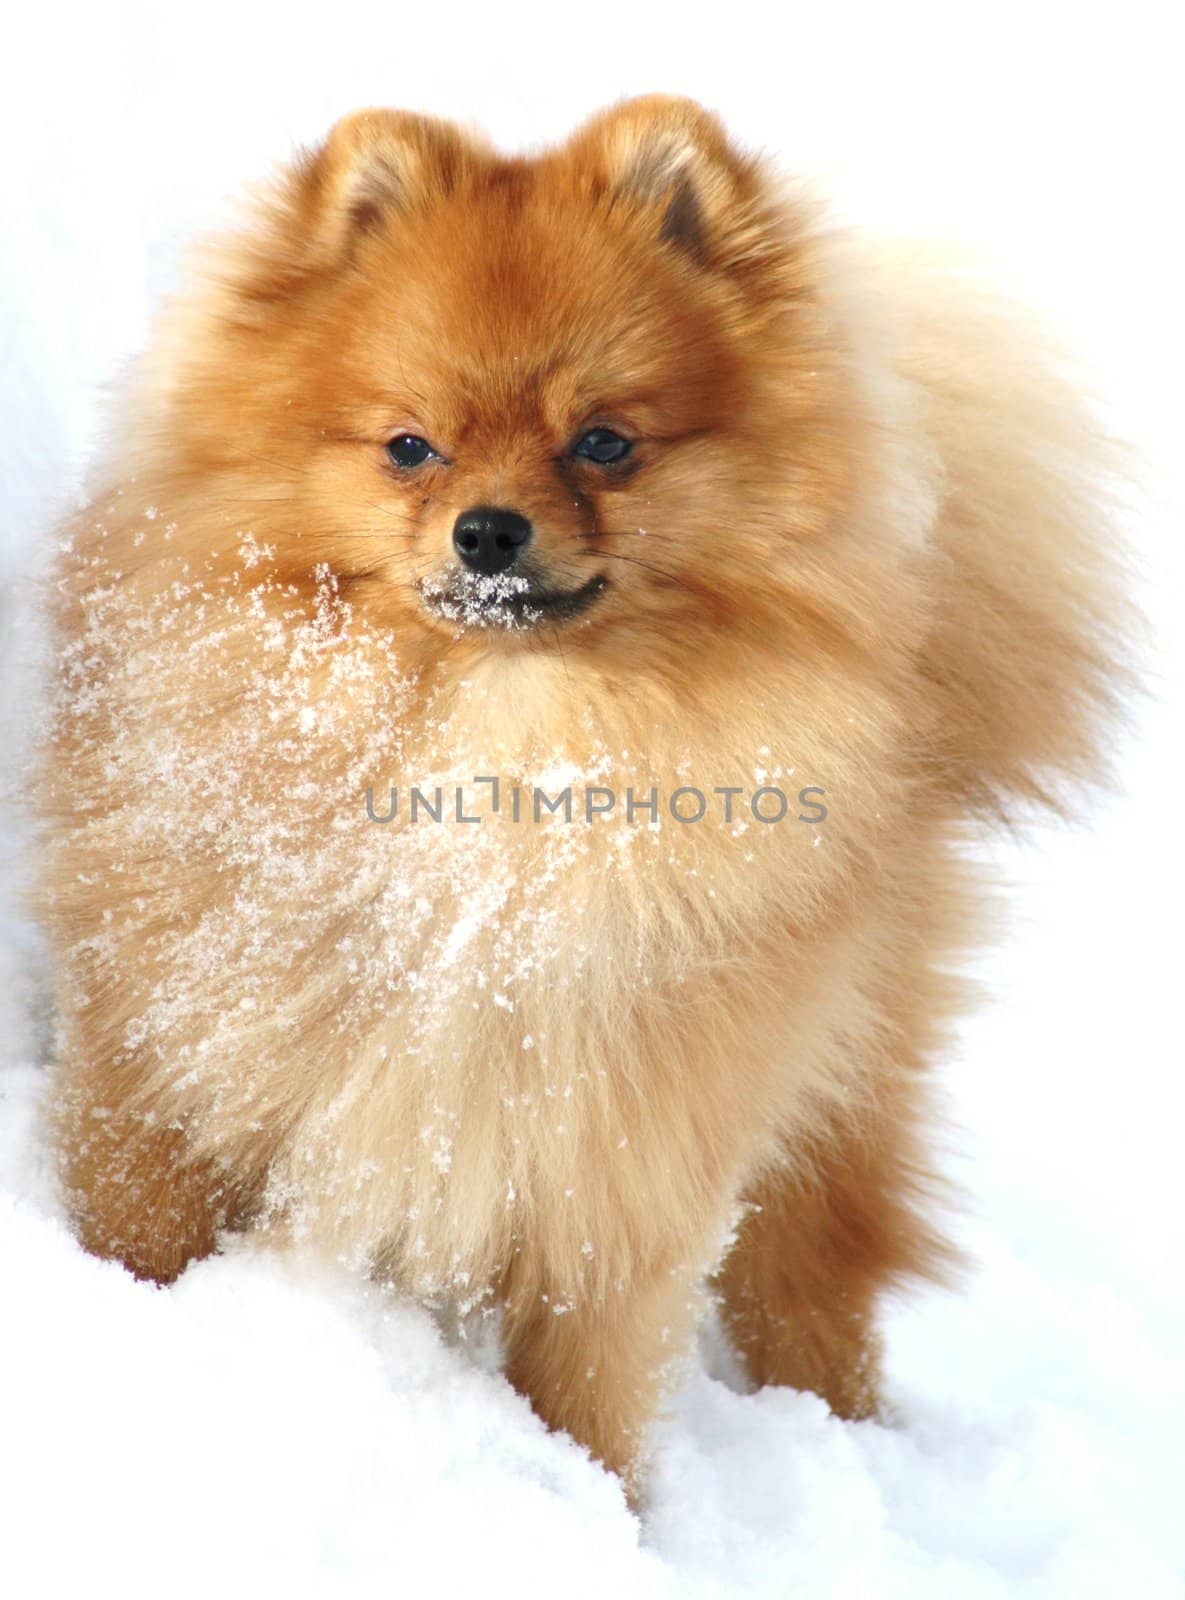 Pomeranian playing in snow